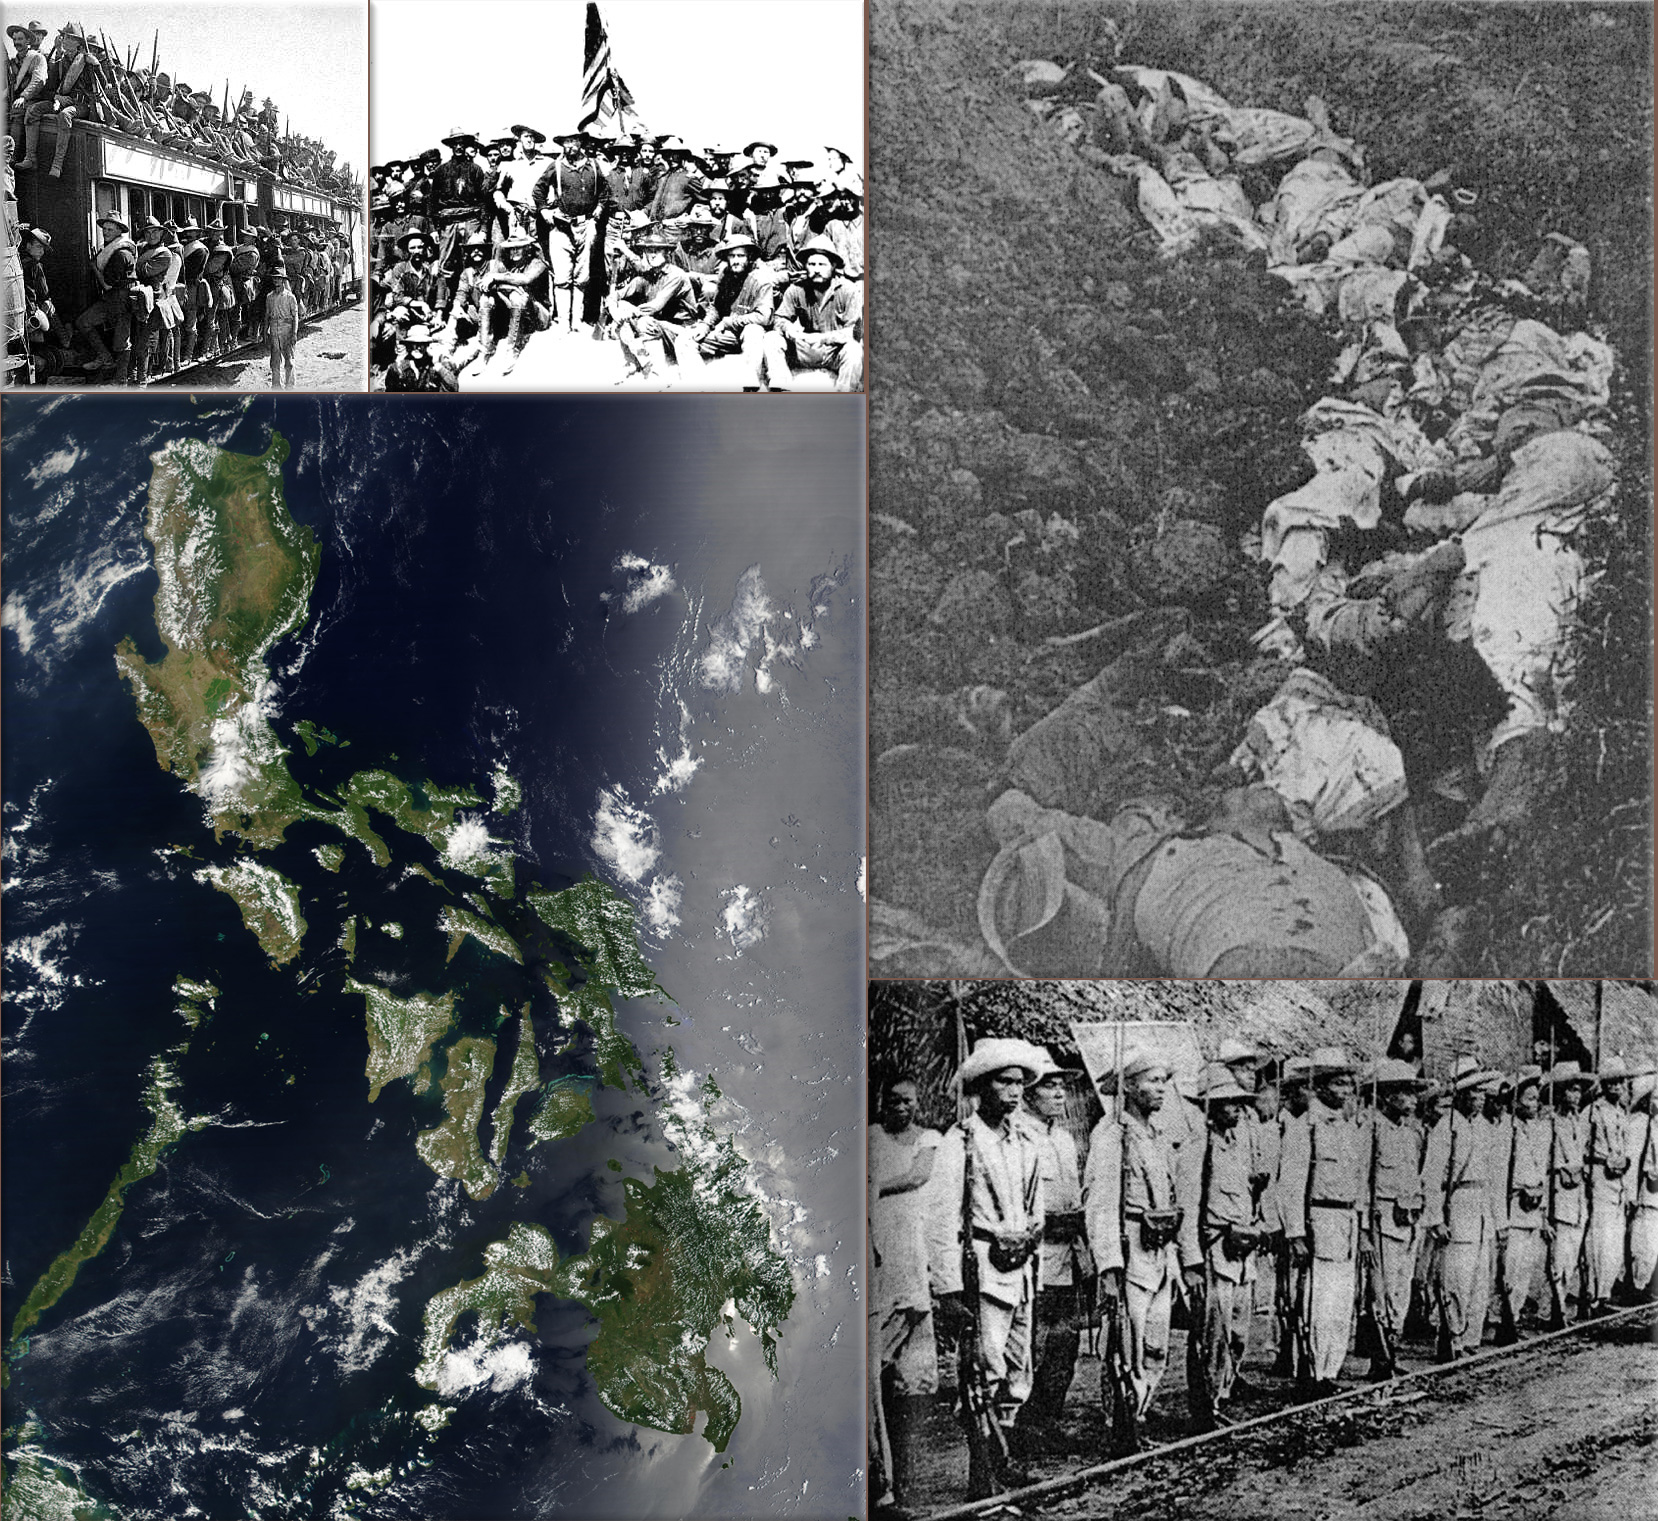 Philippine-American War: Battle of Pulang Lupa; Filipino resistance fighters defeat a small American force